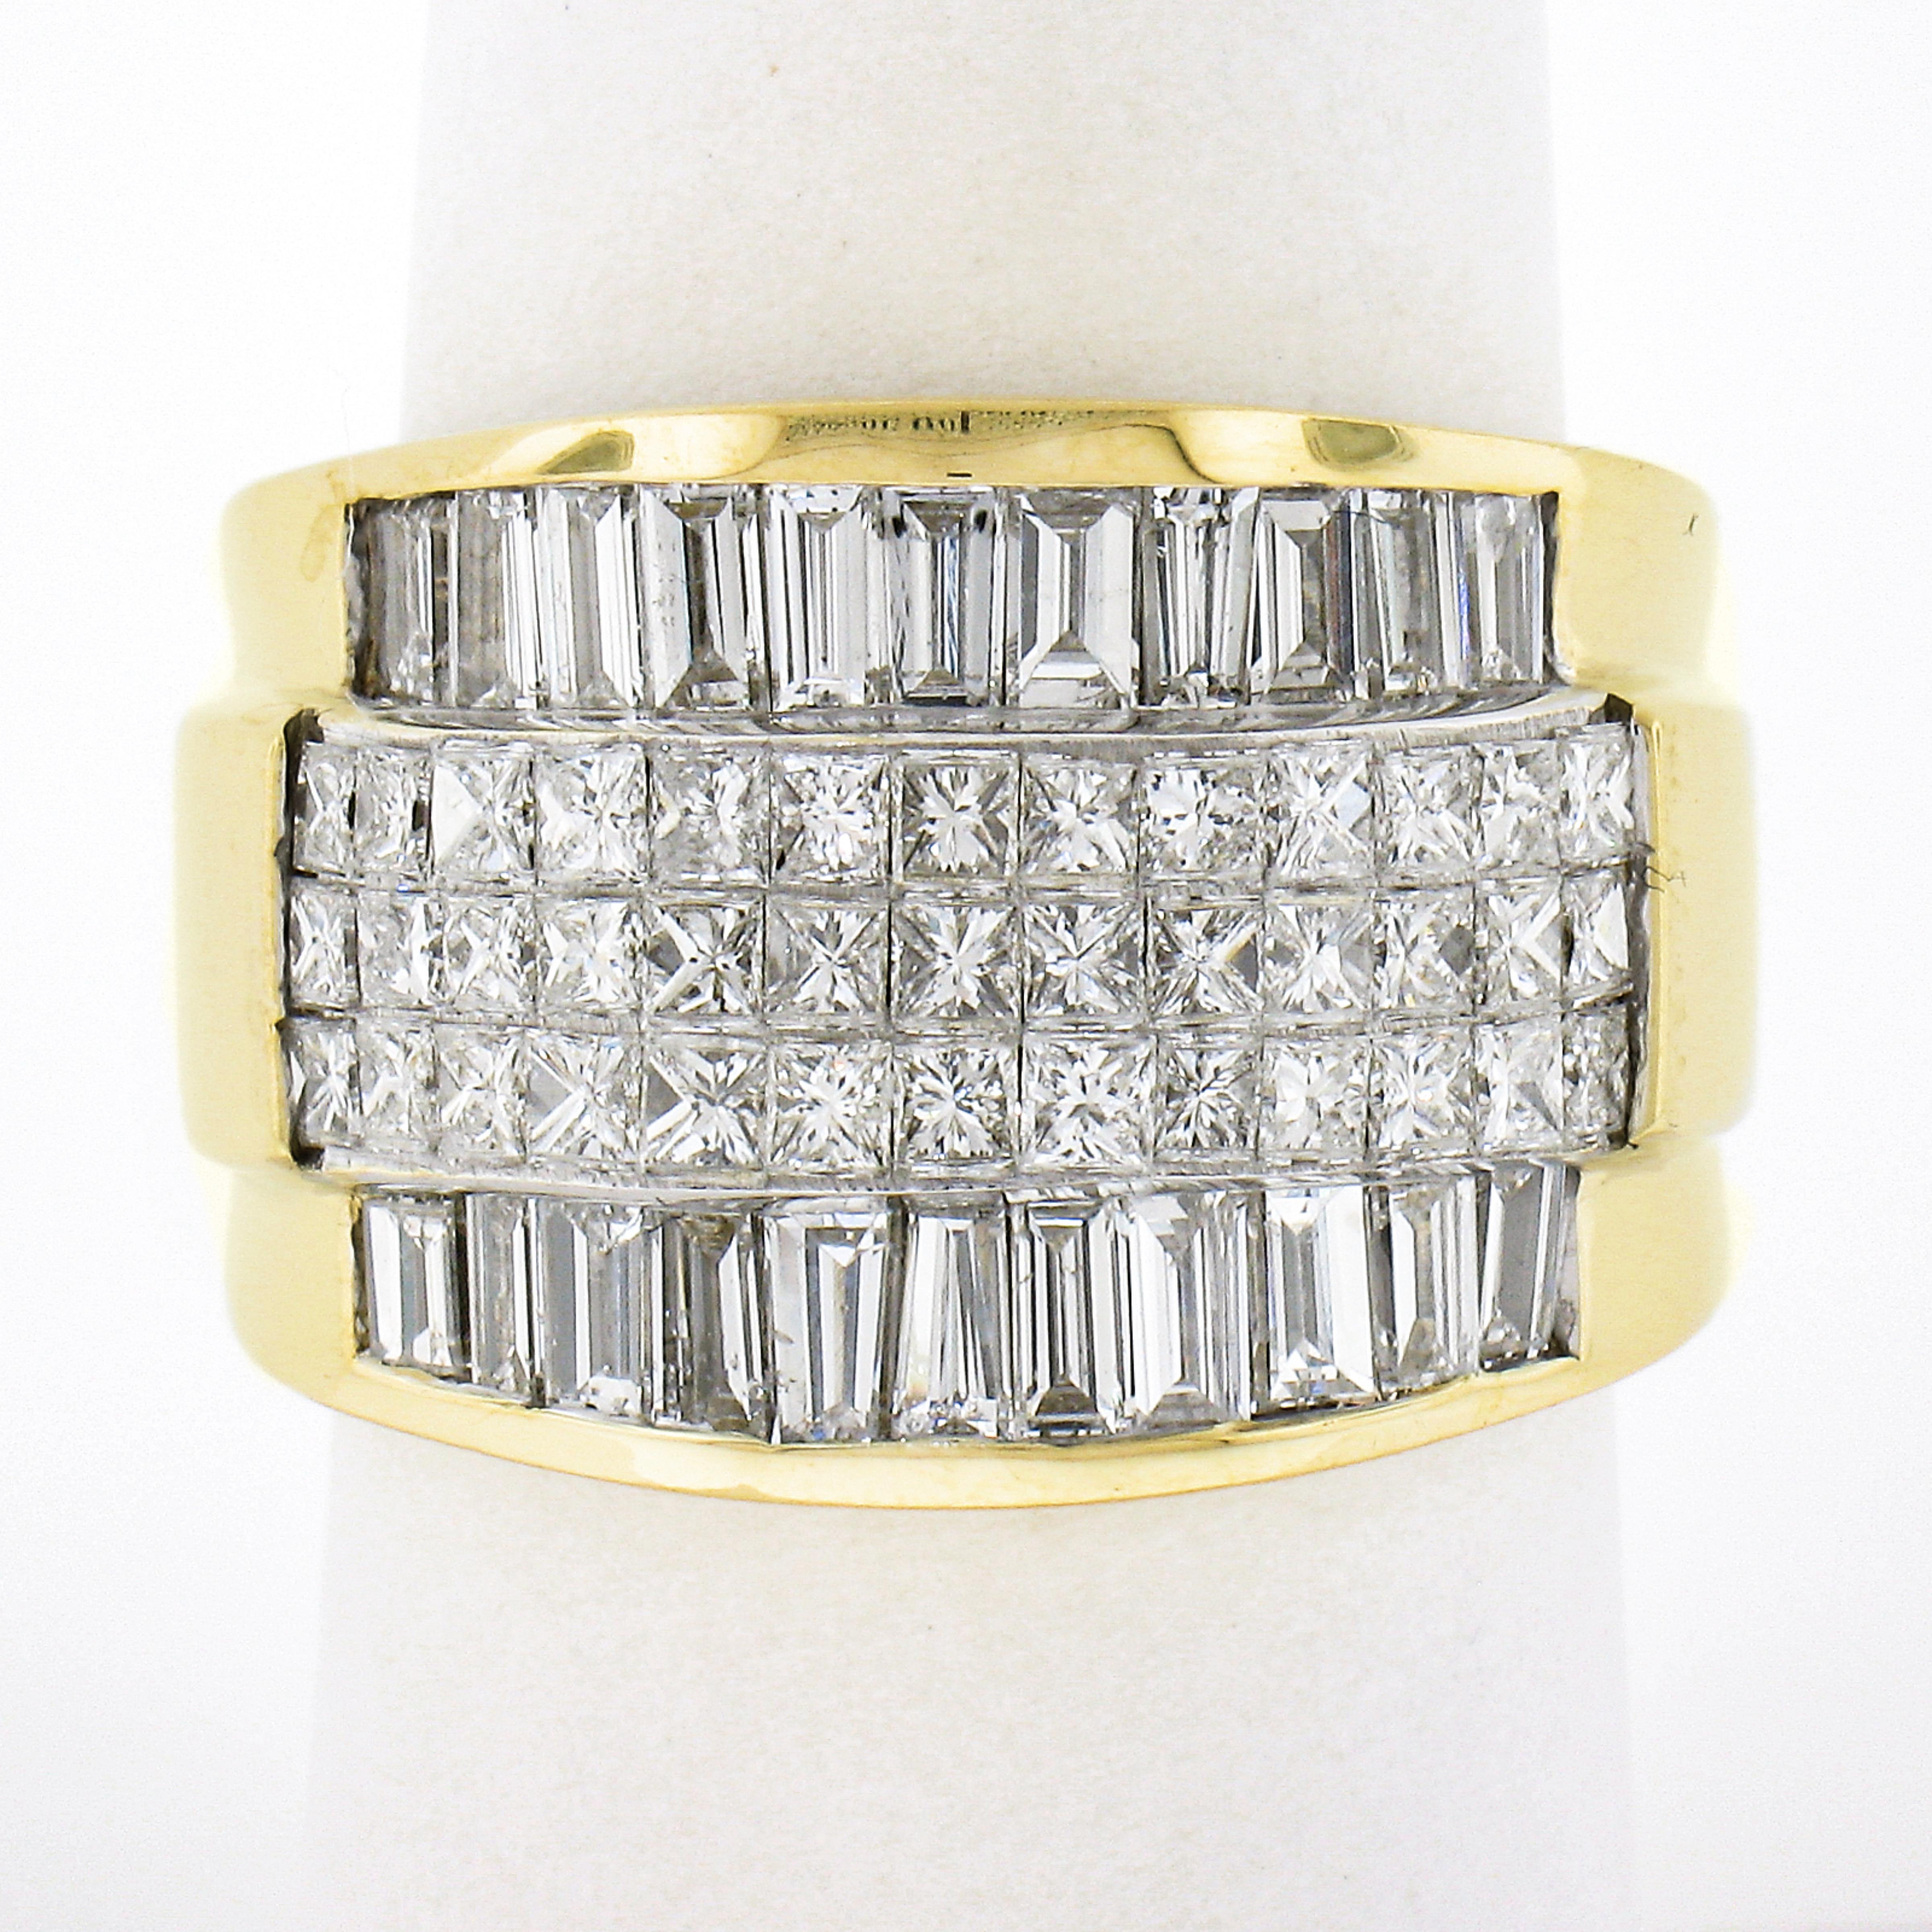 This stunning and very well made diamond band ring is crafted from solid 18k yellow gold and features approximately 3.08 carats of very fine quality diamonds throughout its top. The center displays 3 rows of 39 princess cut diamonds that are